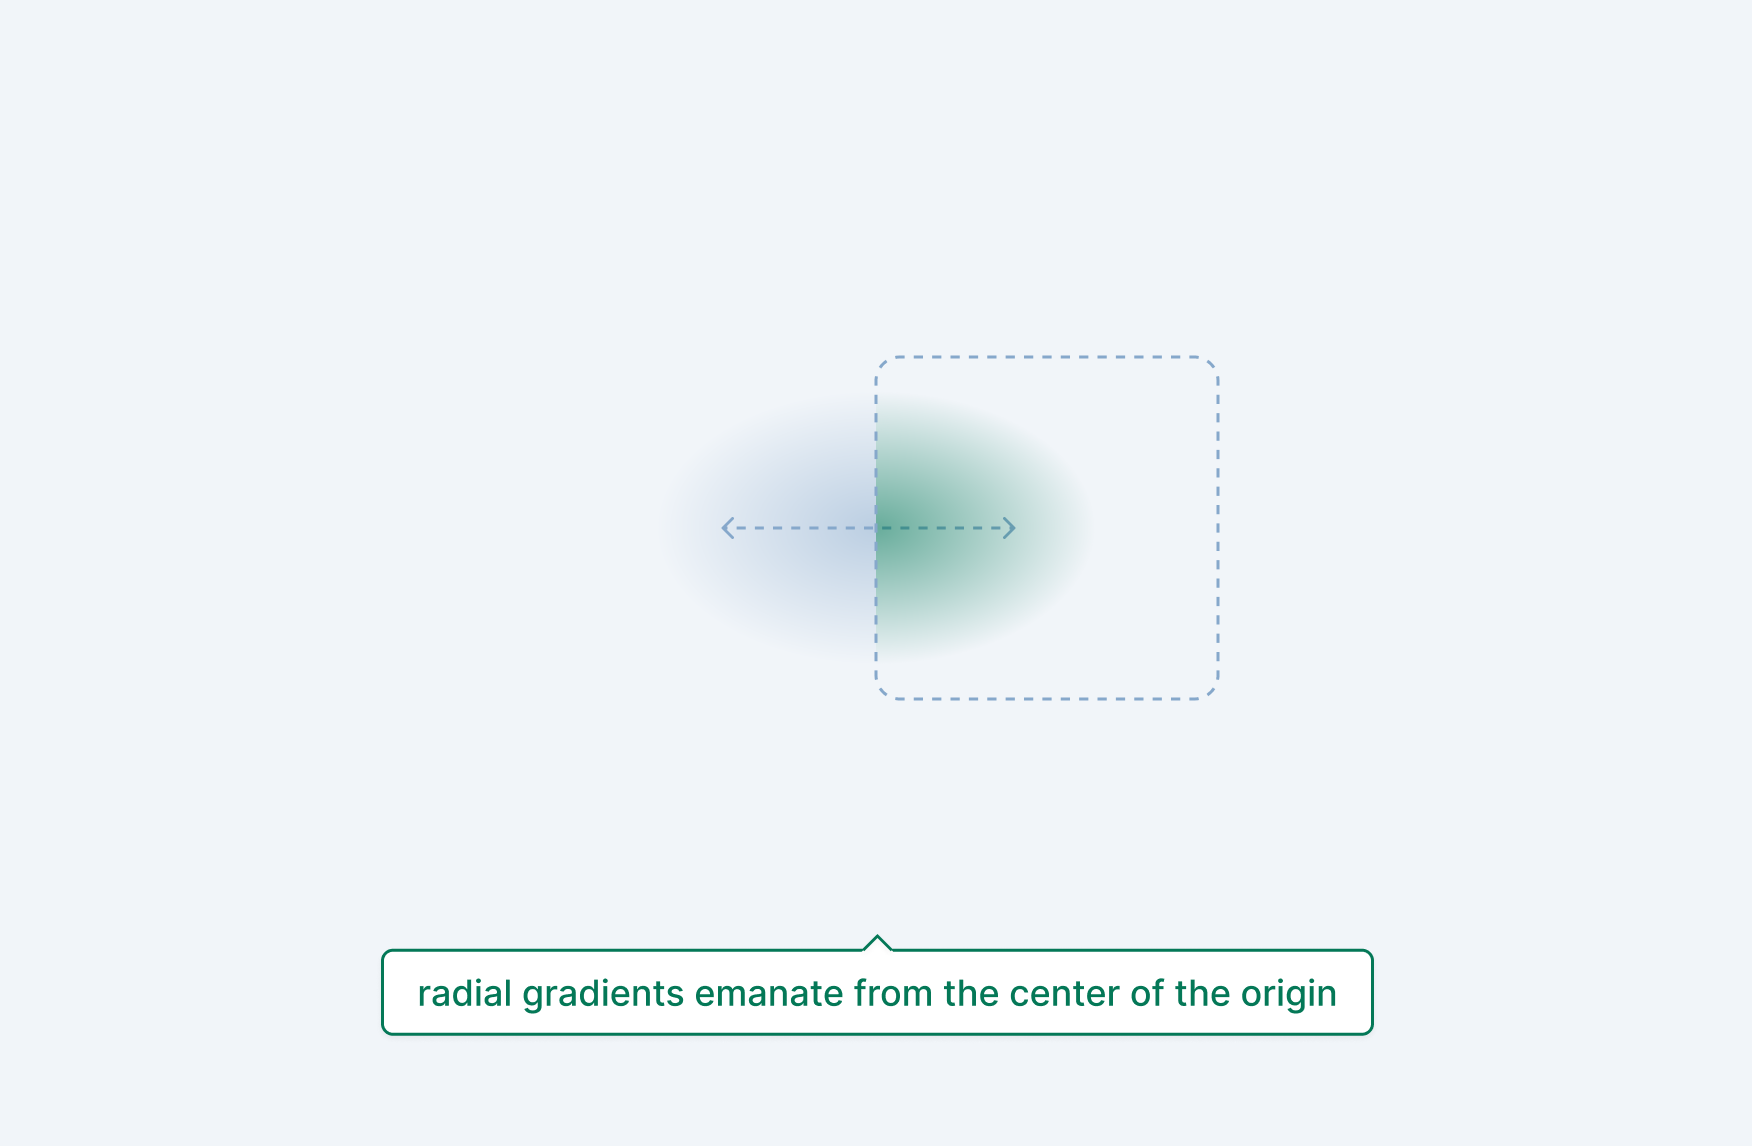 Radial gradients emanate from the center of the origin